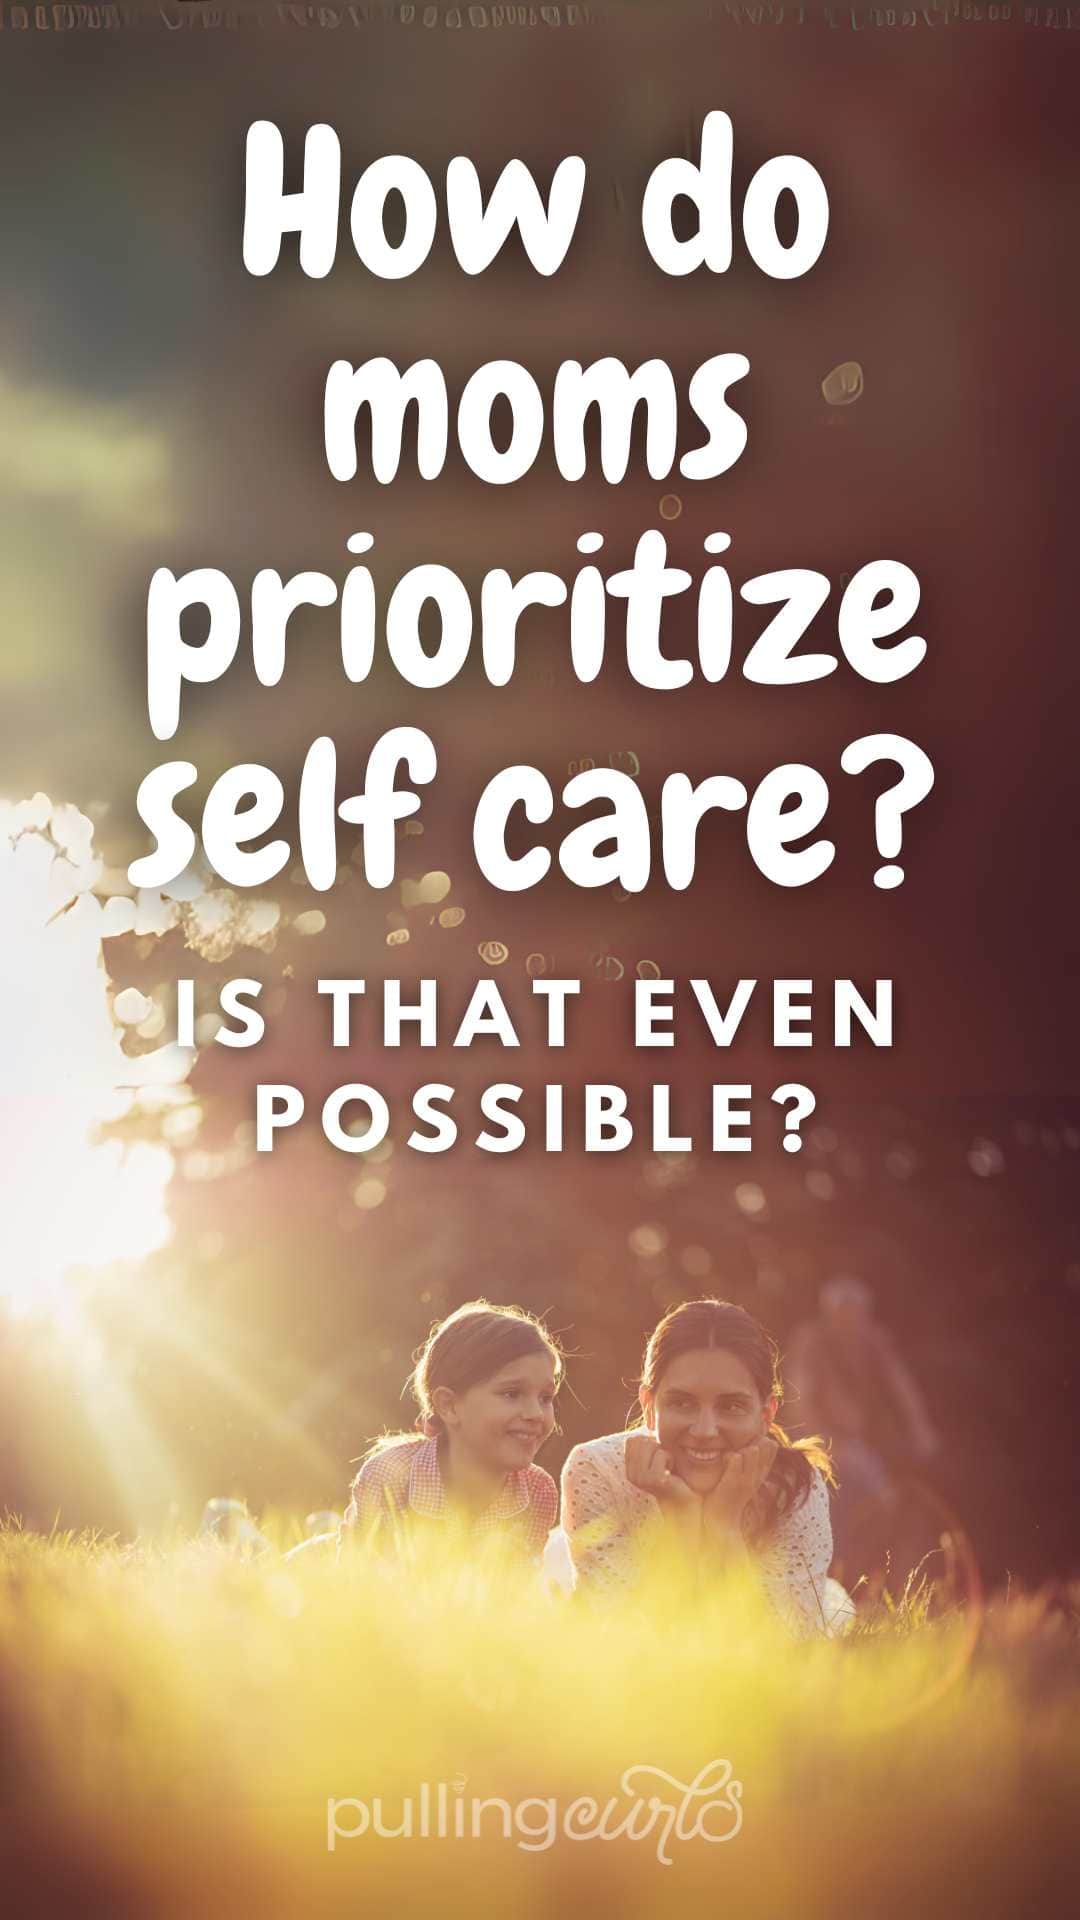 "Self-care tips for busy moms: Learn to prioritize time for yourself during the school year. Discover the benefits of scheduling self-care, staying active, and asking for help. Find out how to delegate some tasks to others, involve your kids in self-care, and make time for your personal needs despite a busy schedule. Keep things simple and remember to take care of yourself." via @pullingcurls